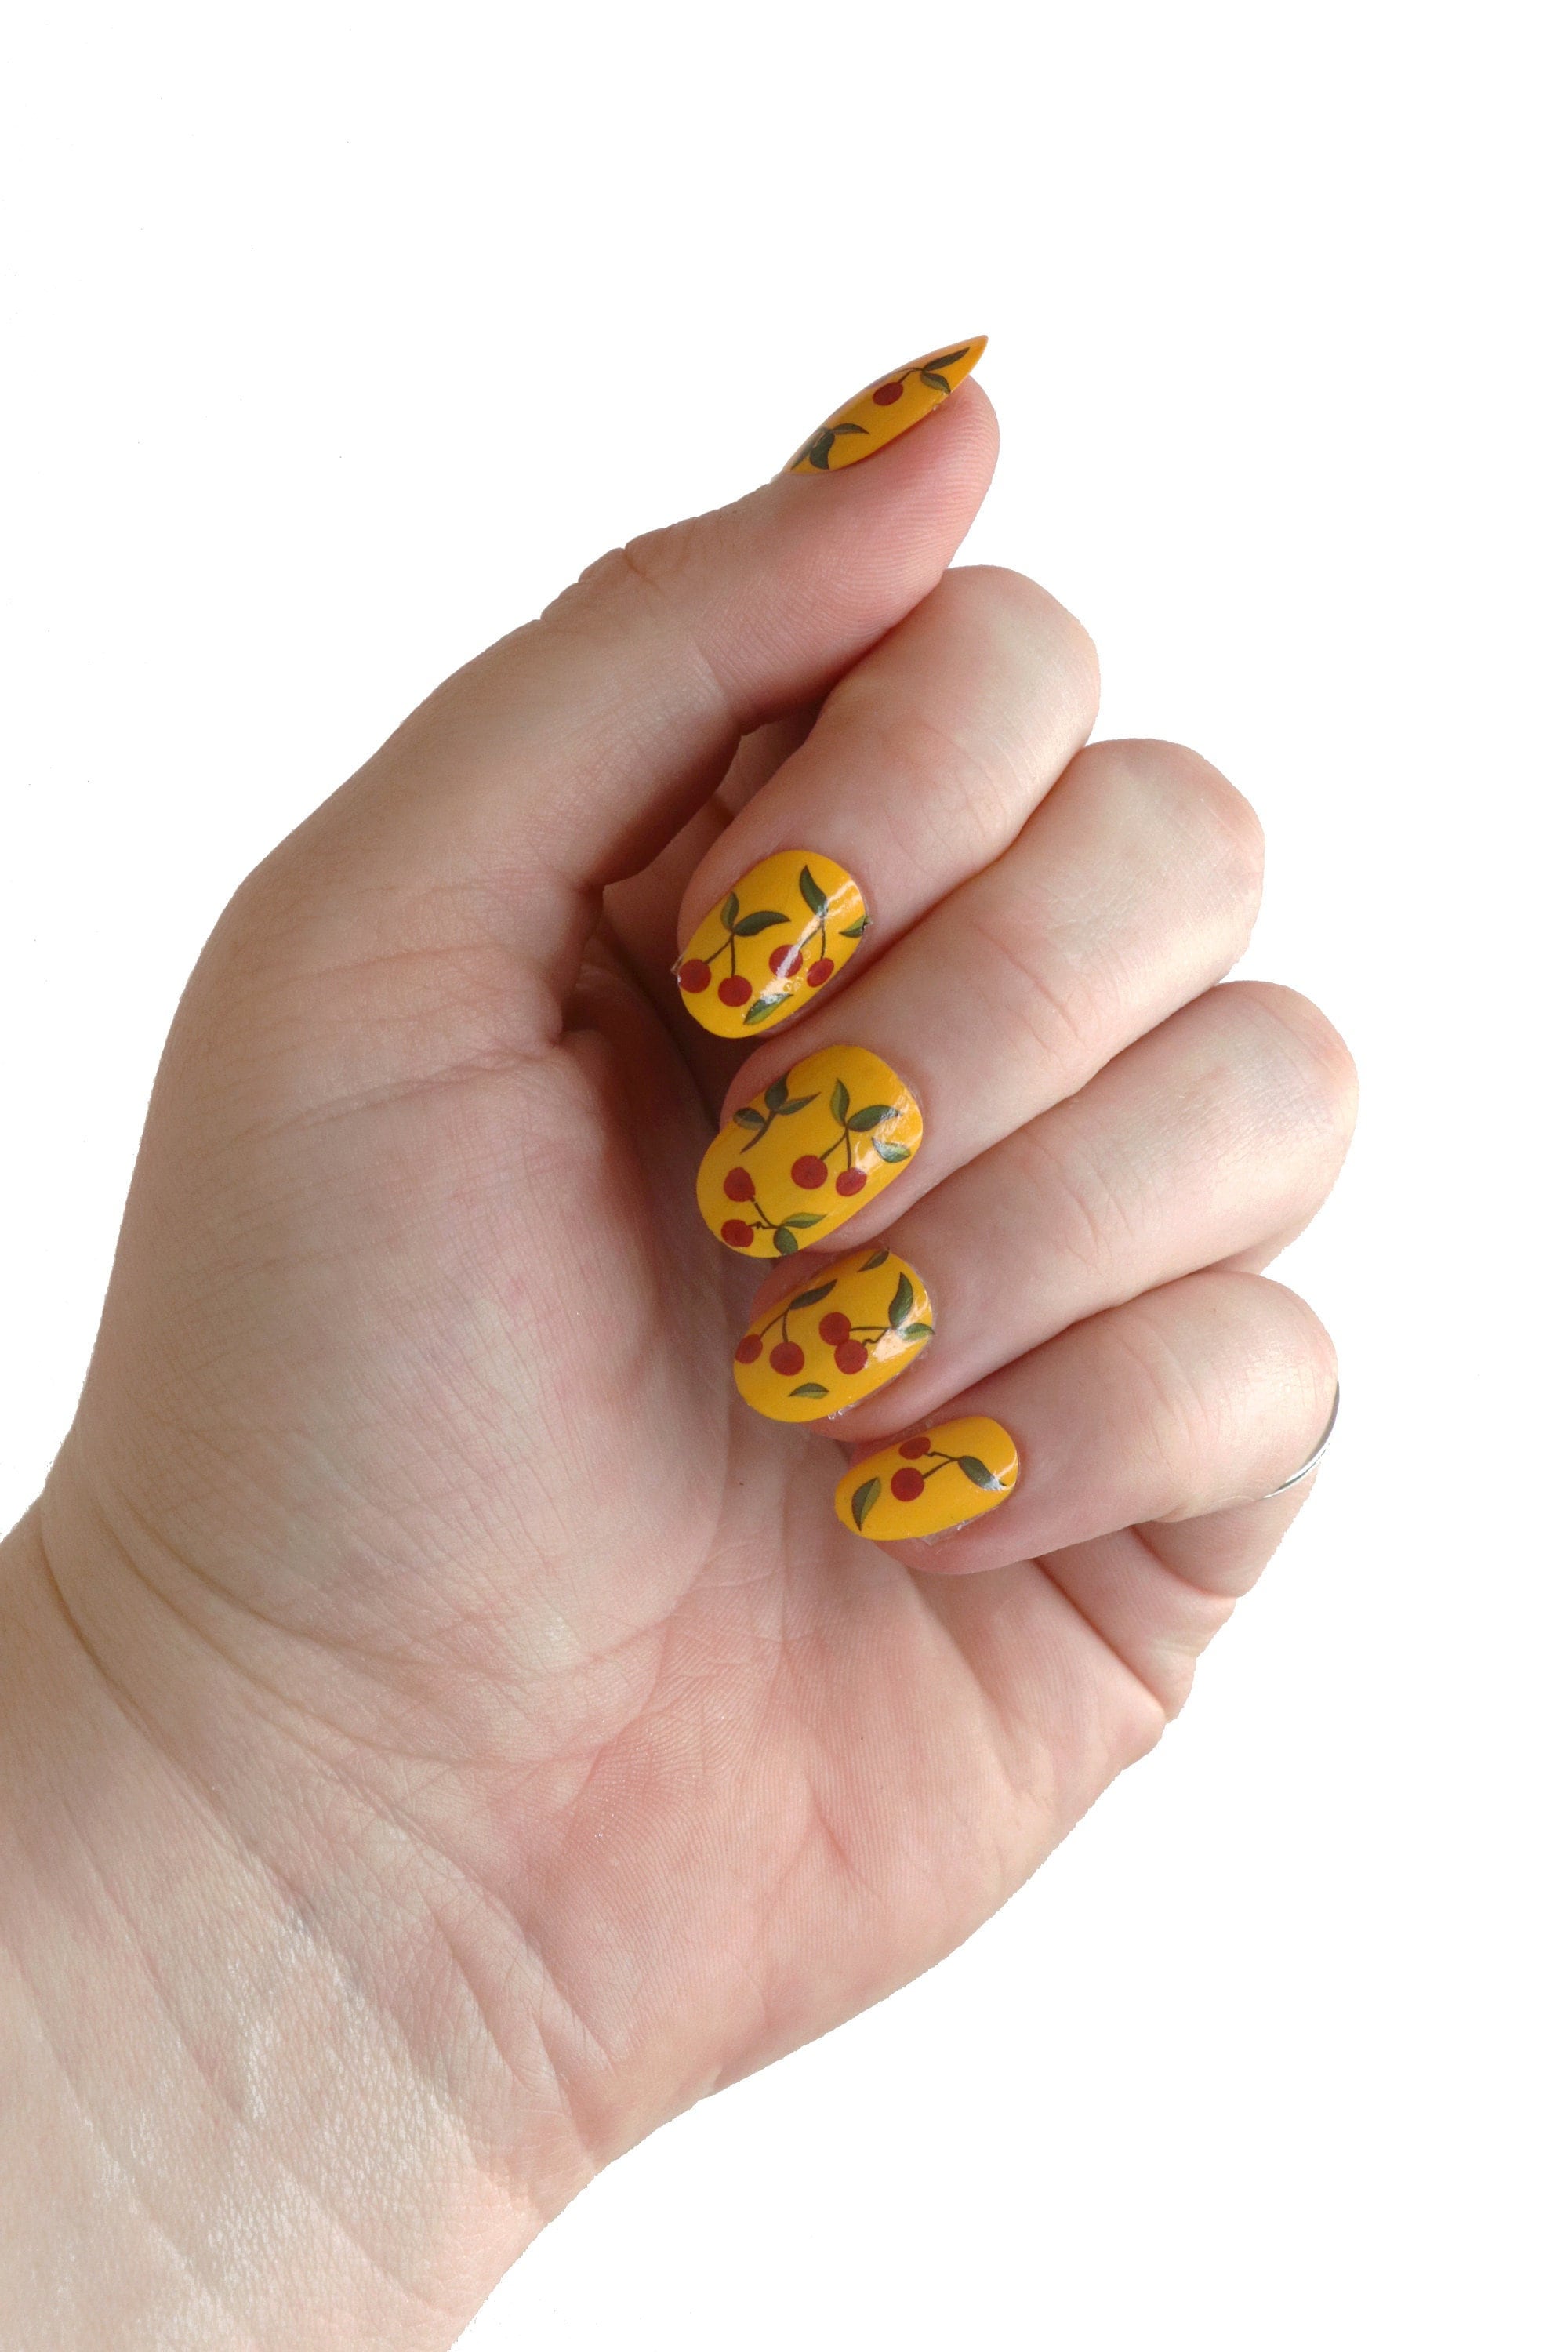 Fruit Manicure Sticker by Nail Alliance for iOS & Android